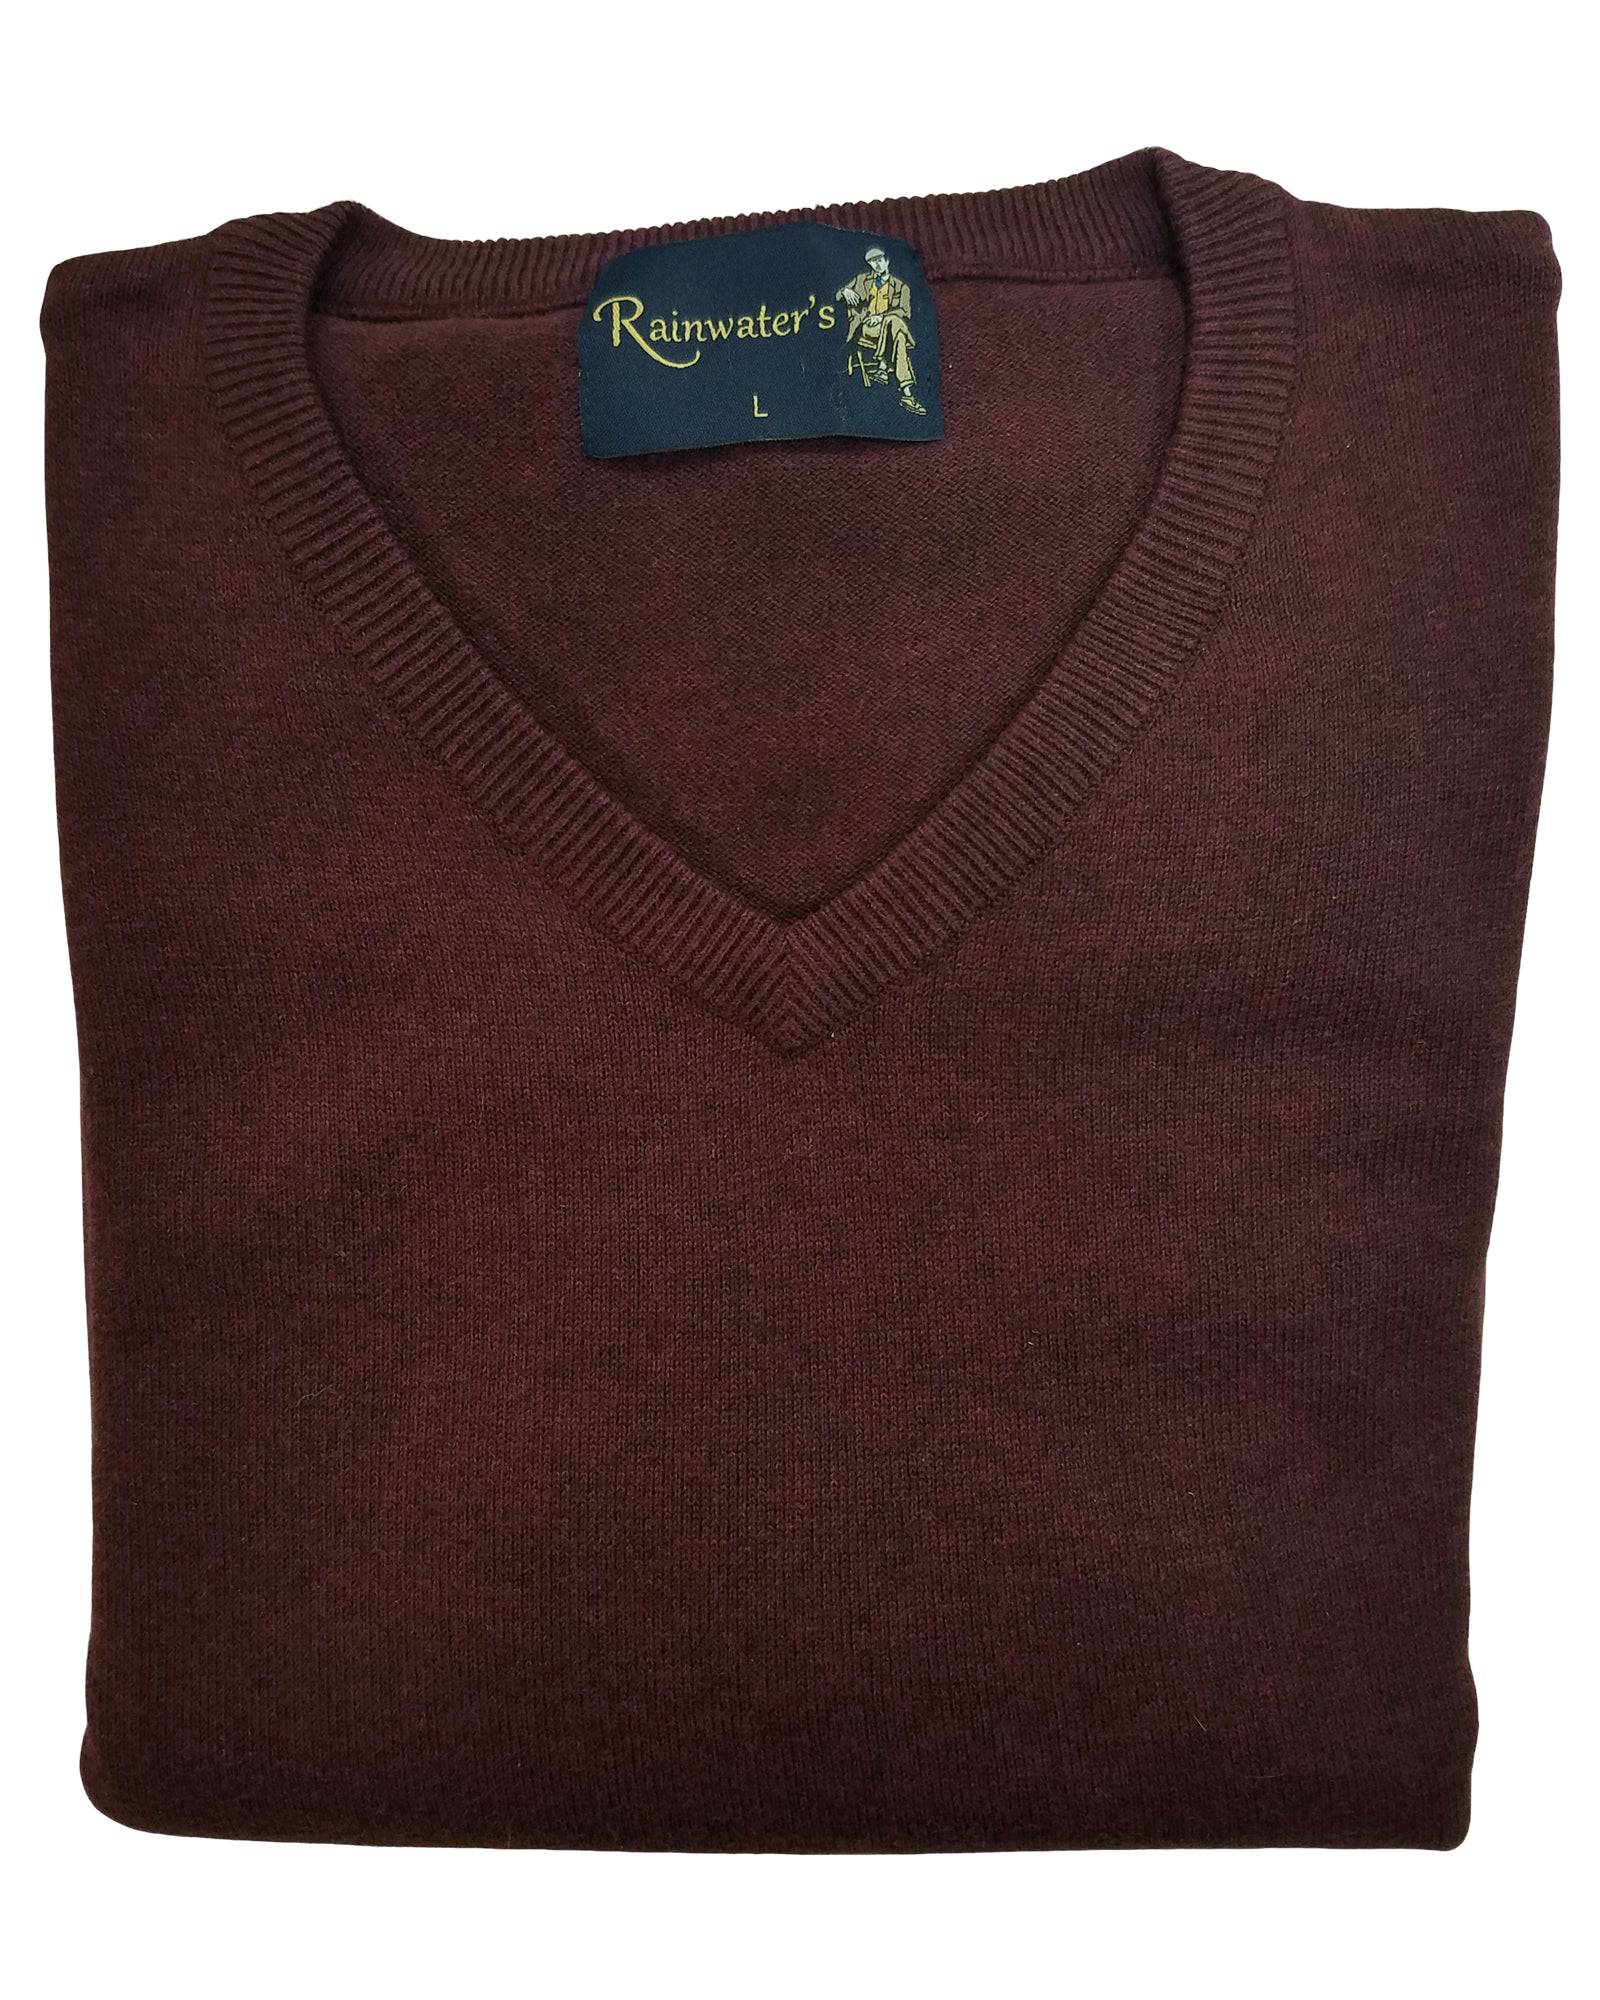 V-Neck Sweater Cotton Blend in Cabernet - Rainwater's Men's Clothing and Tuxedo Rental